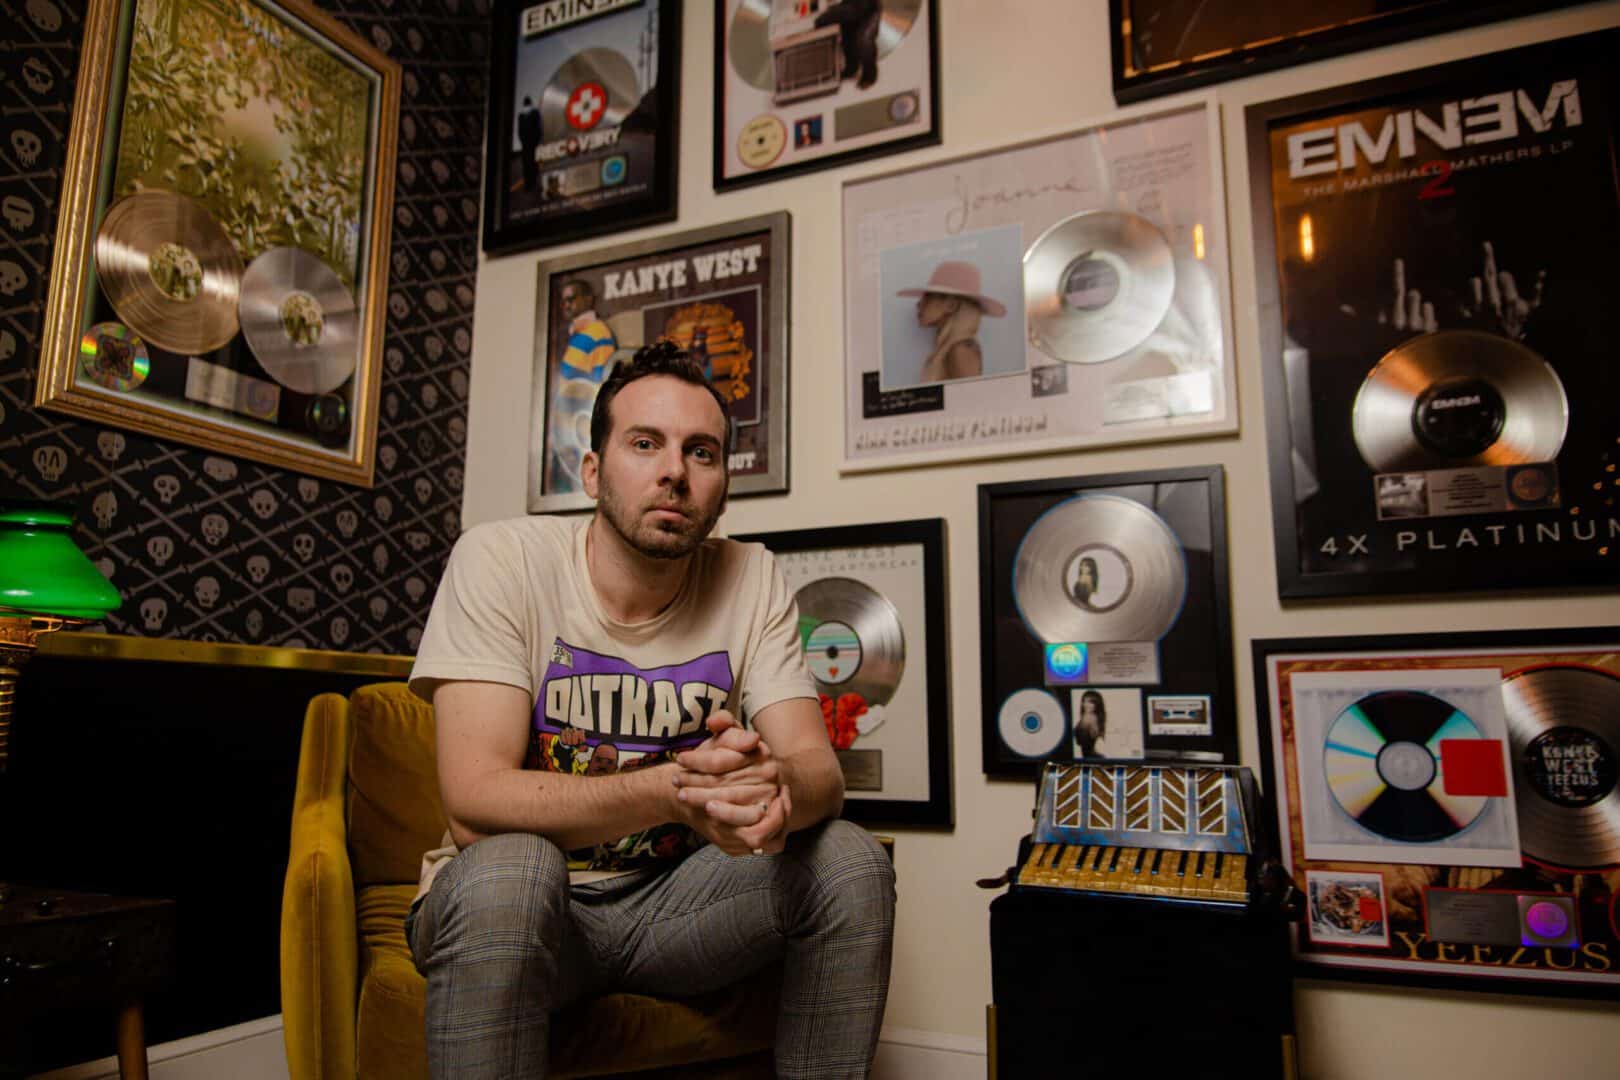 A man sitting in front of many records on the wall.